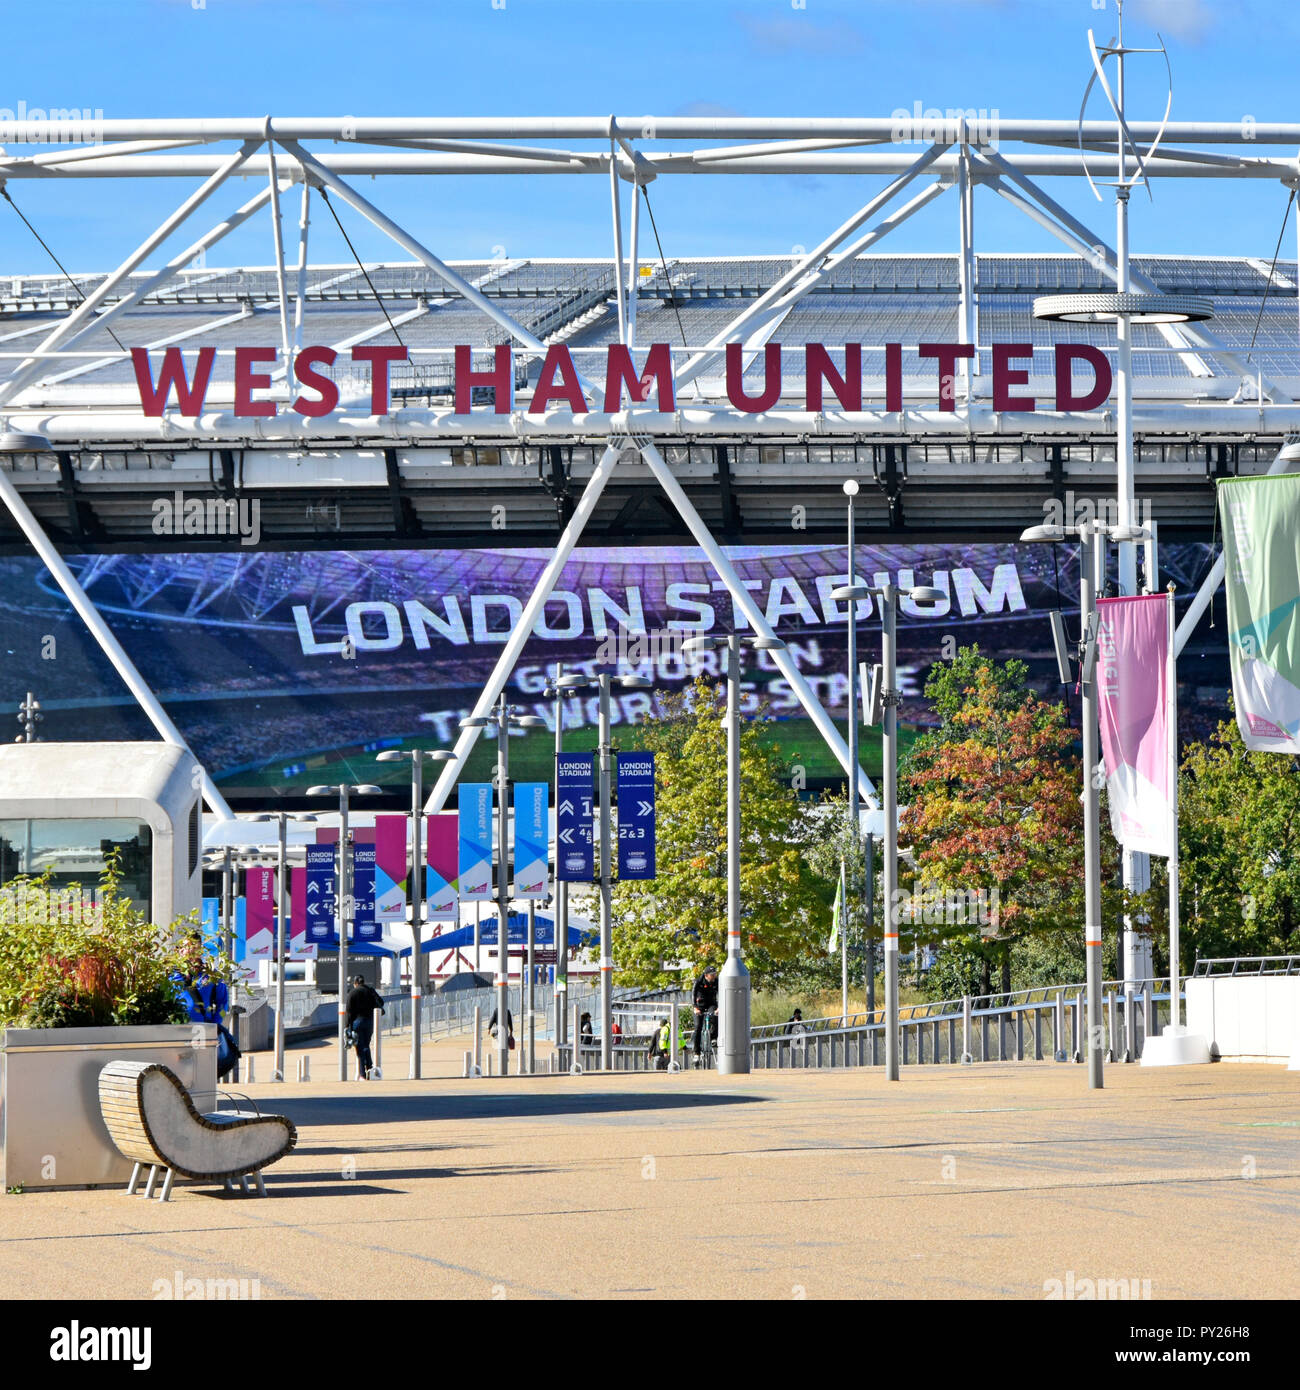 Advert sign for London Stadium on giant outdoor television screen below West Ham United sign Olympic stadium Queen Elizabeth Olympic park England UK Stock Photo